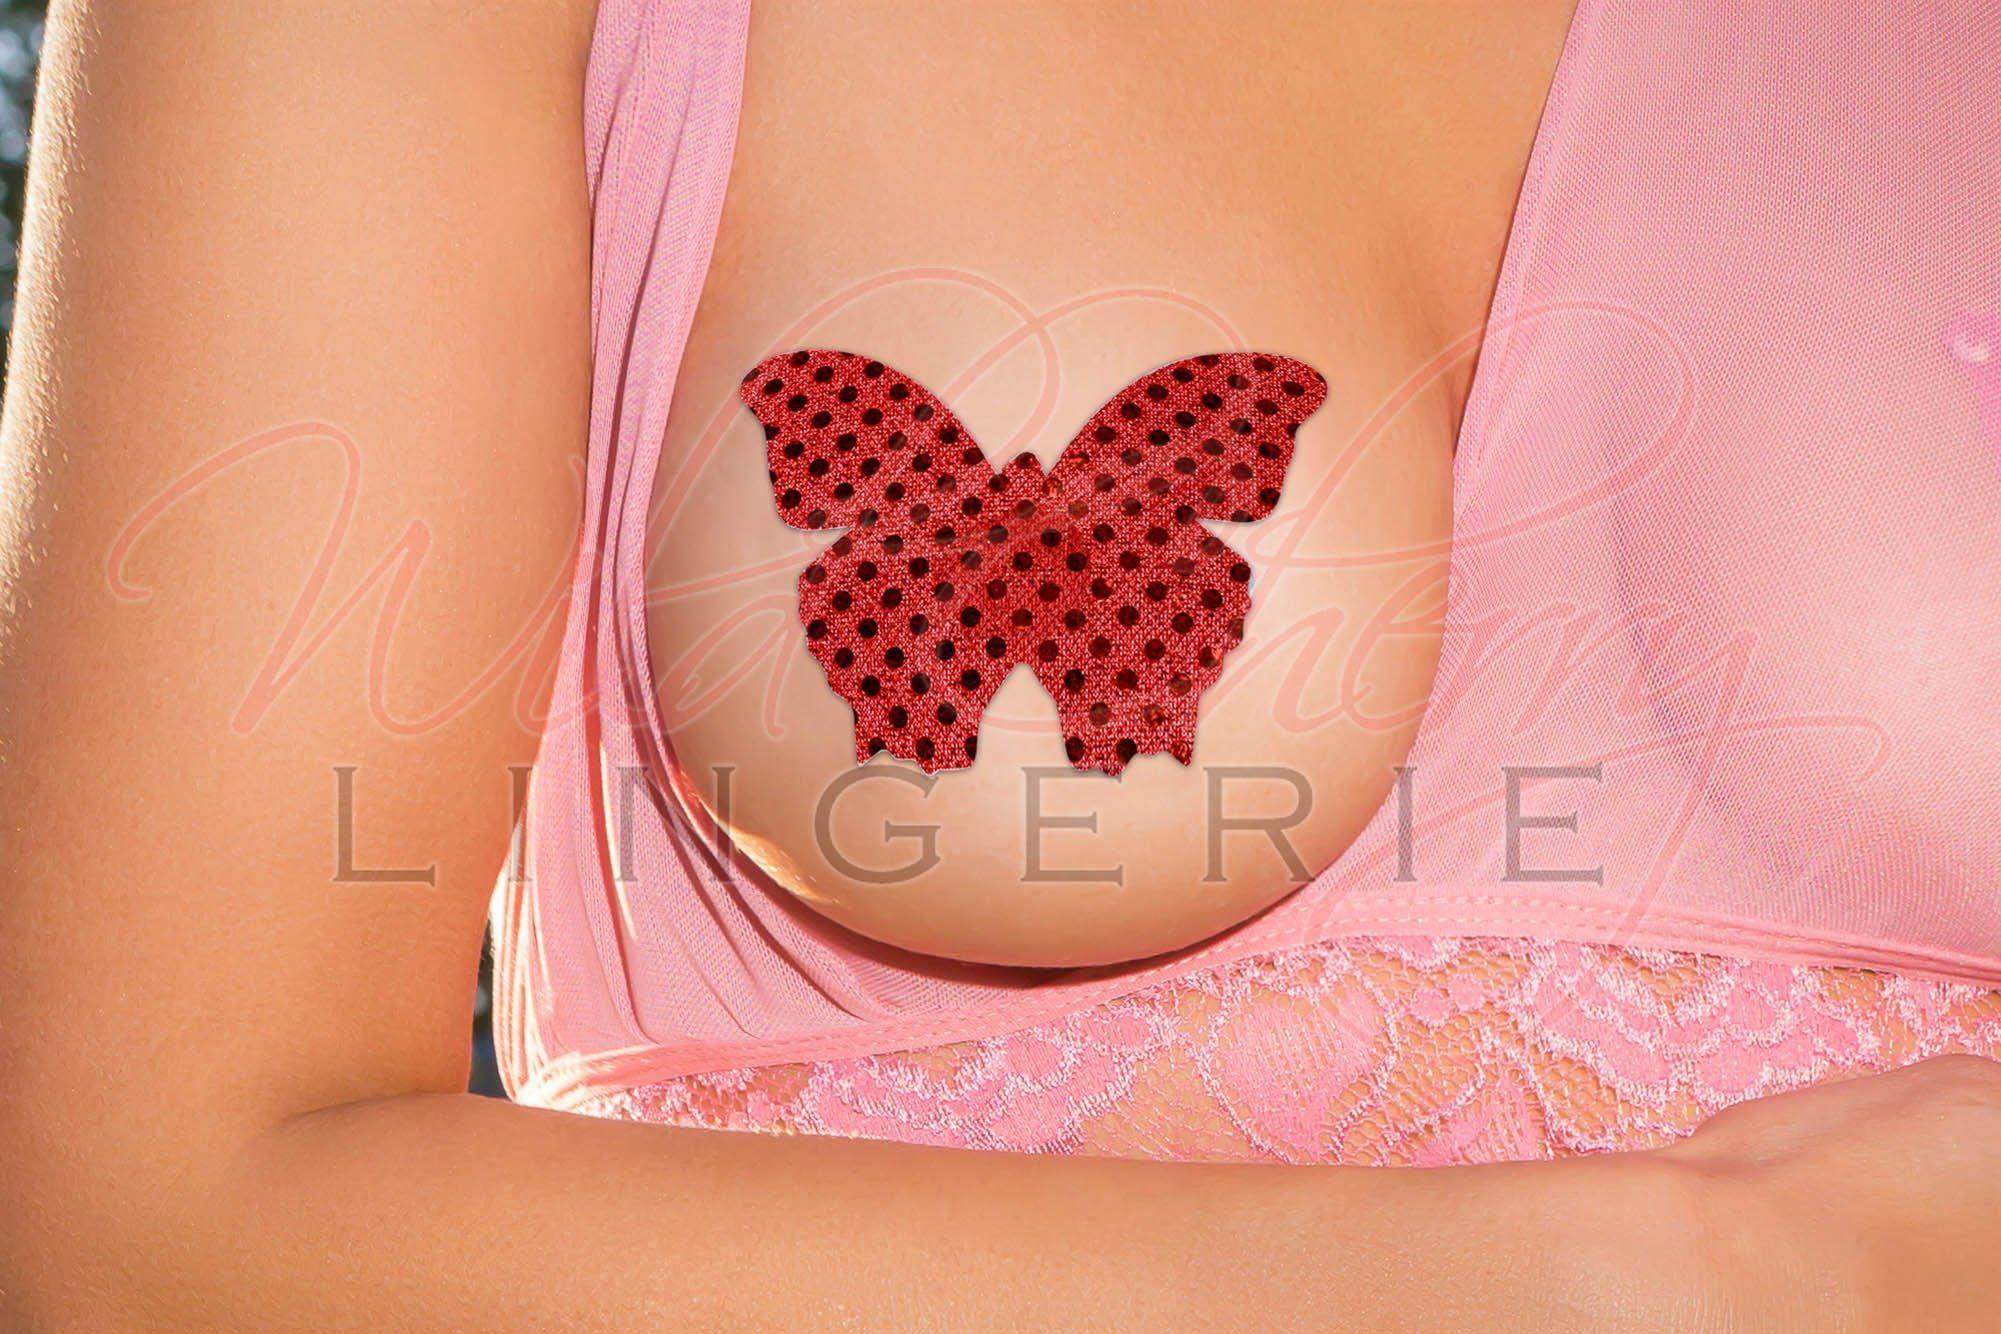 Butterfly Nipple Covers, Accessories, Wild Cherry Lingerie - Wild Cherry Lingerie